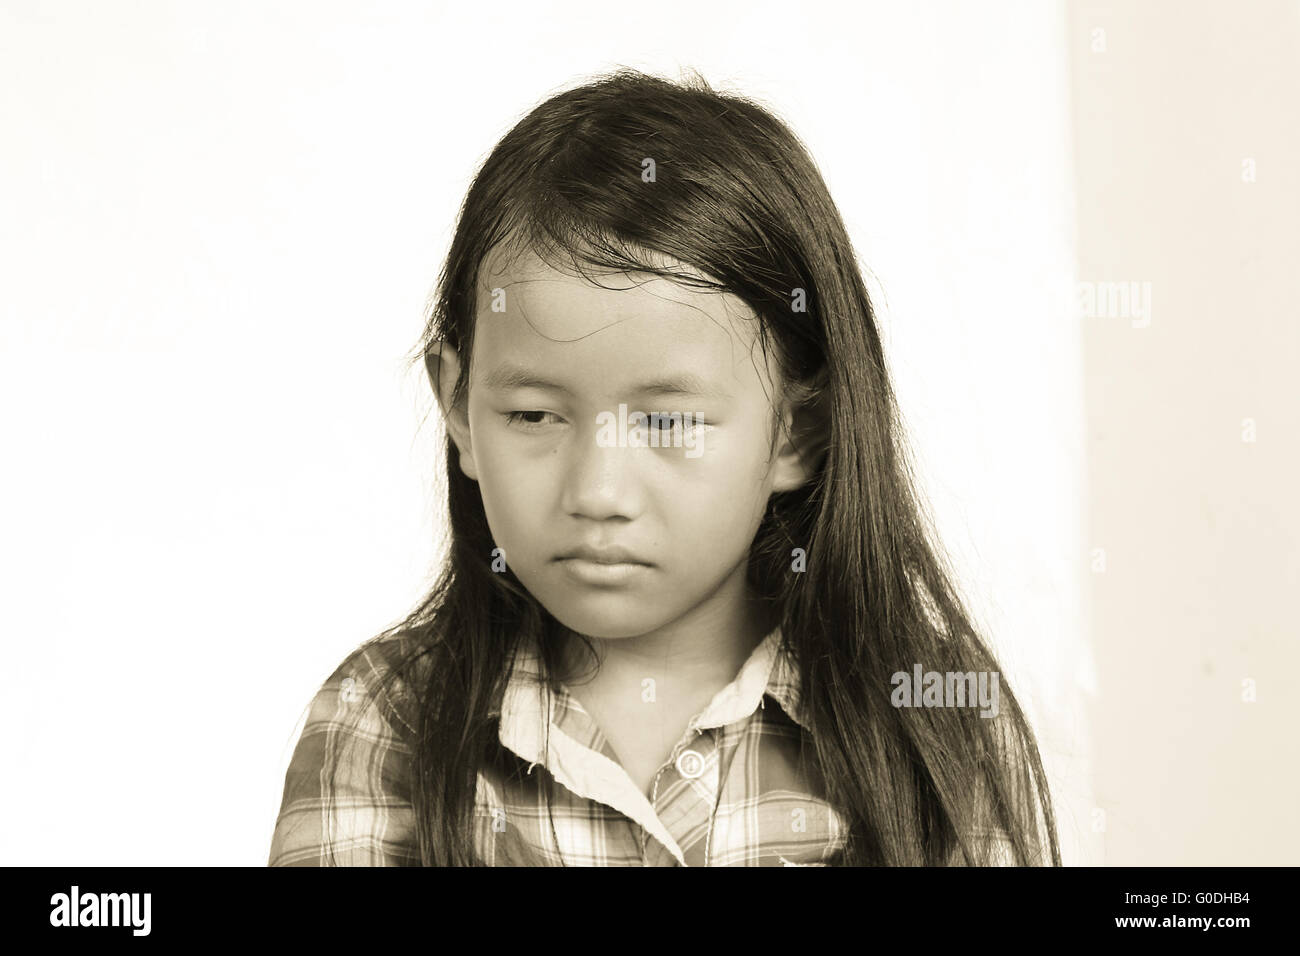 Sad and crying little girl looking down in monochrome Stock Photo